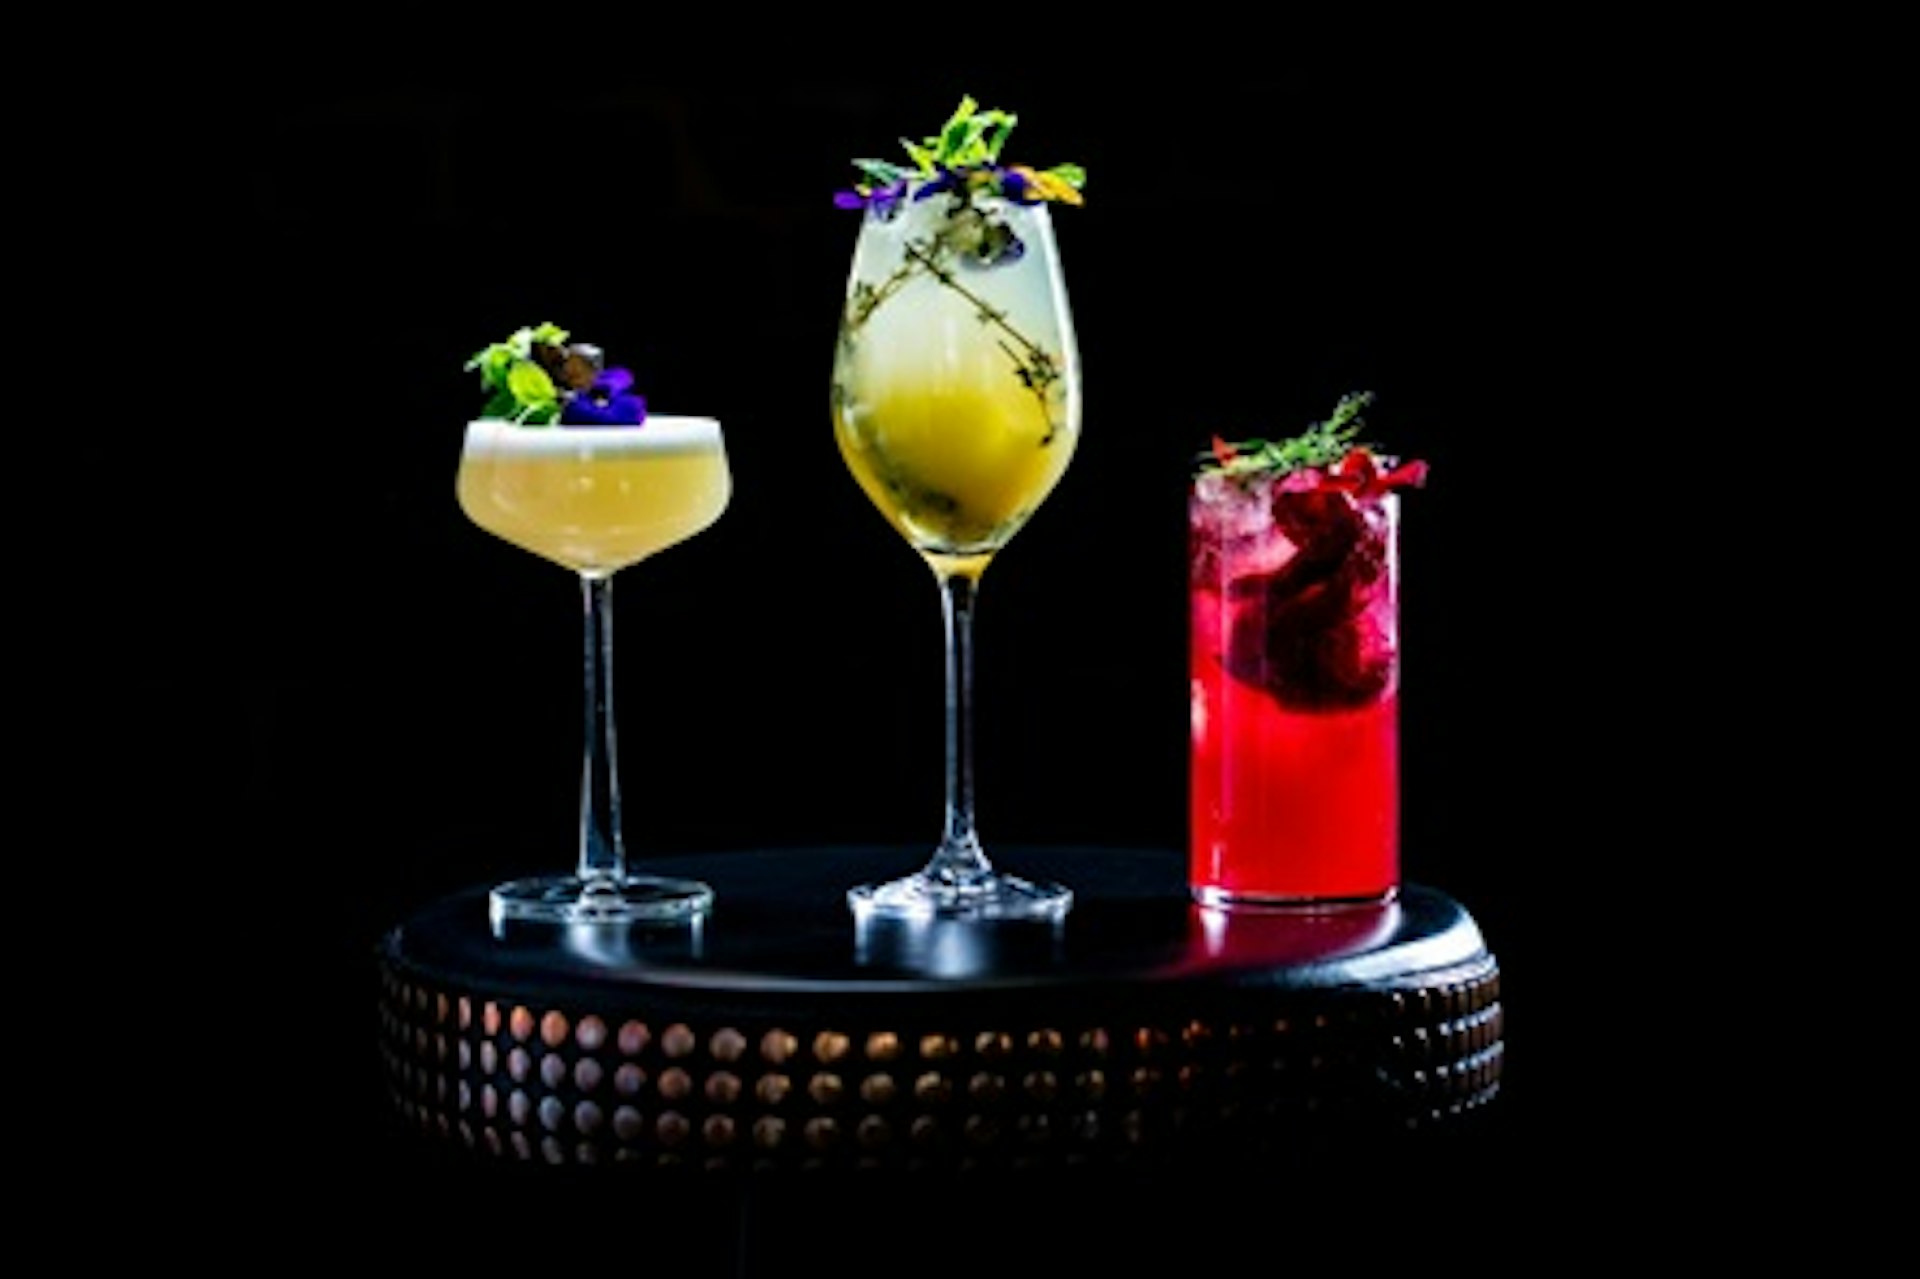 Bespoke Cocktail and Bar Snacks for Two at Old Bengal Bar 2